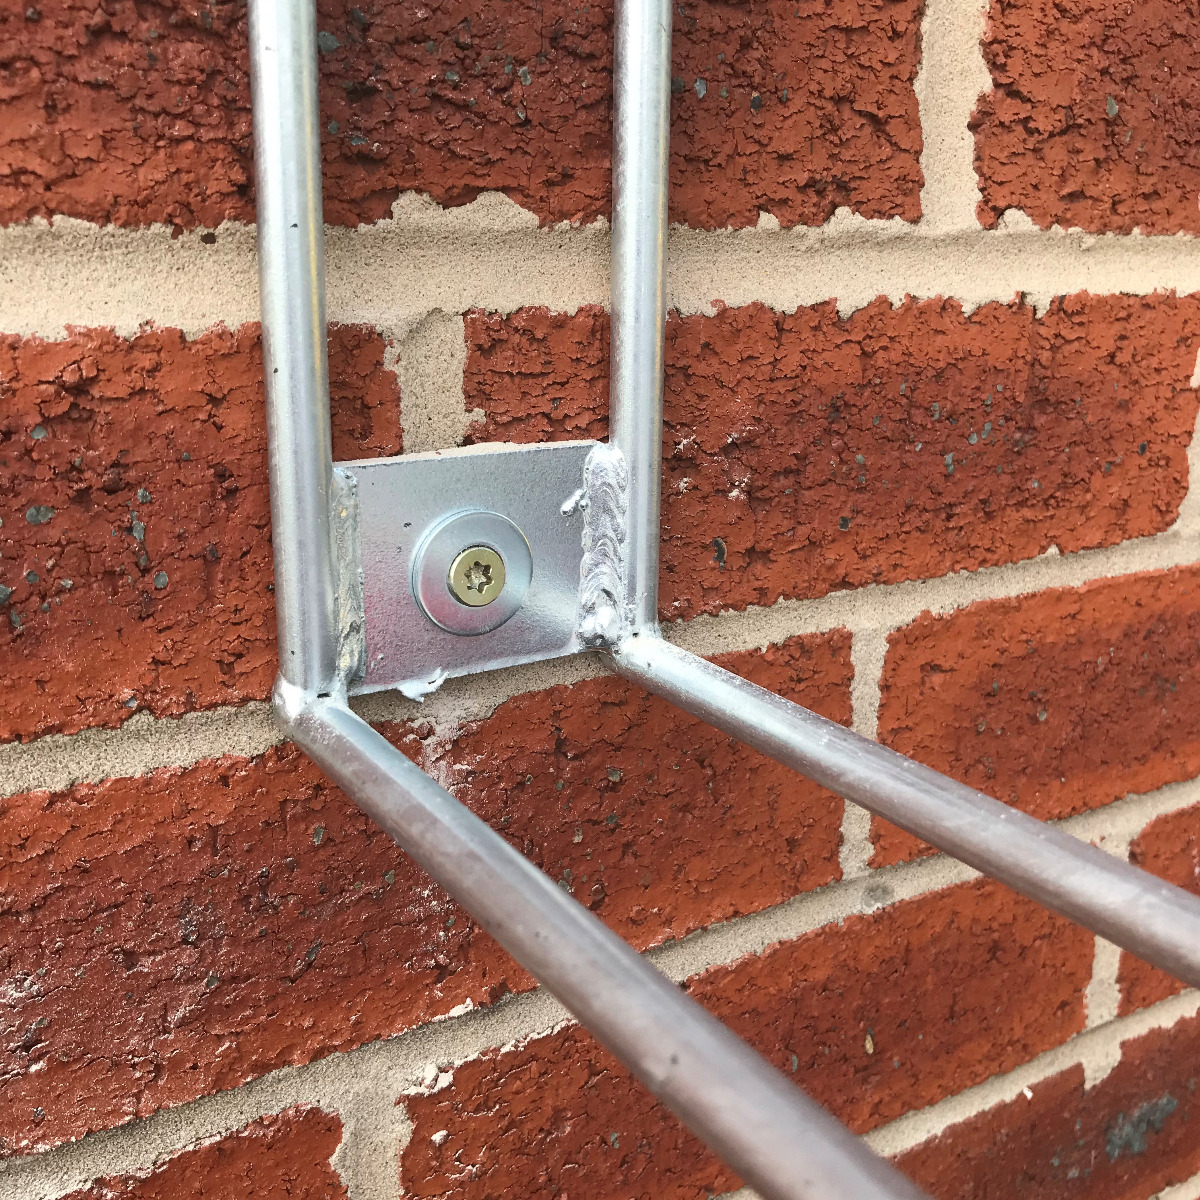 Verti Apex Wall Mounted Cycle Stand 